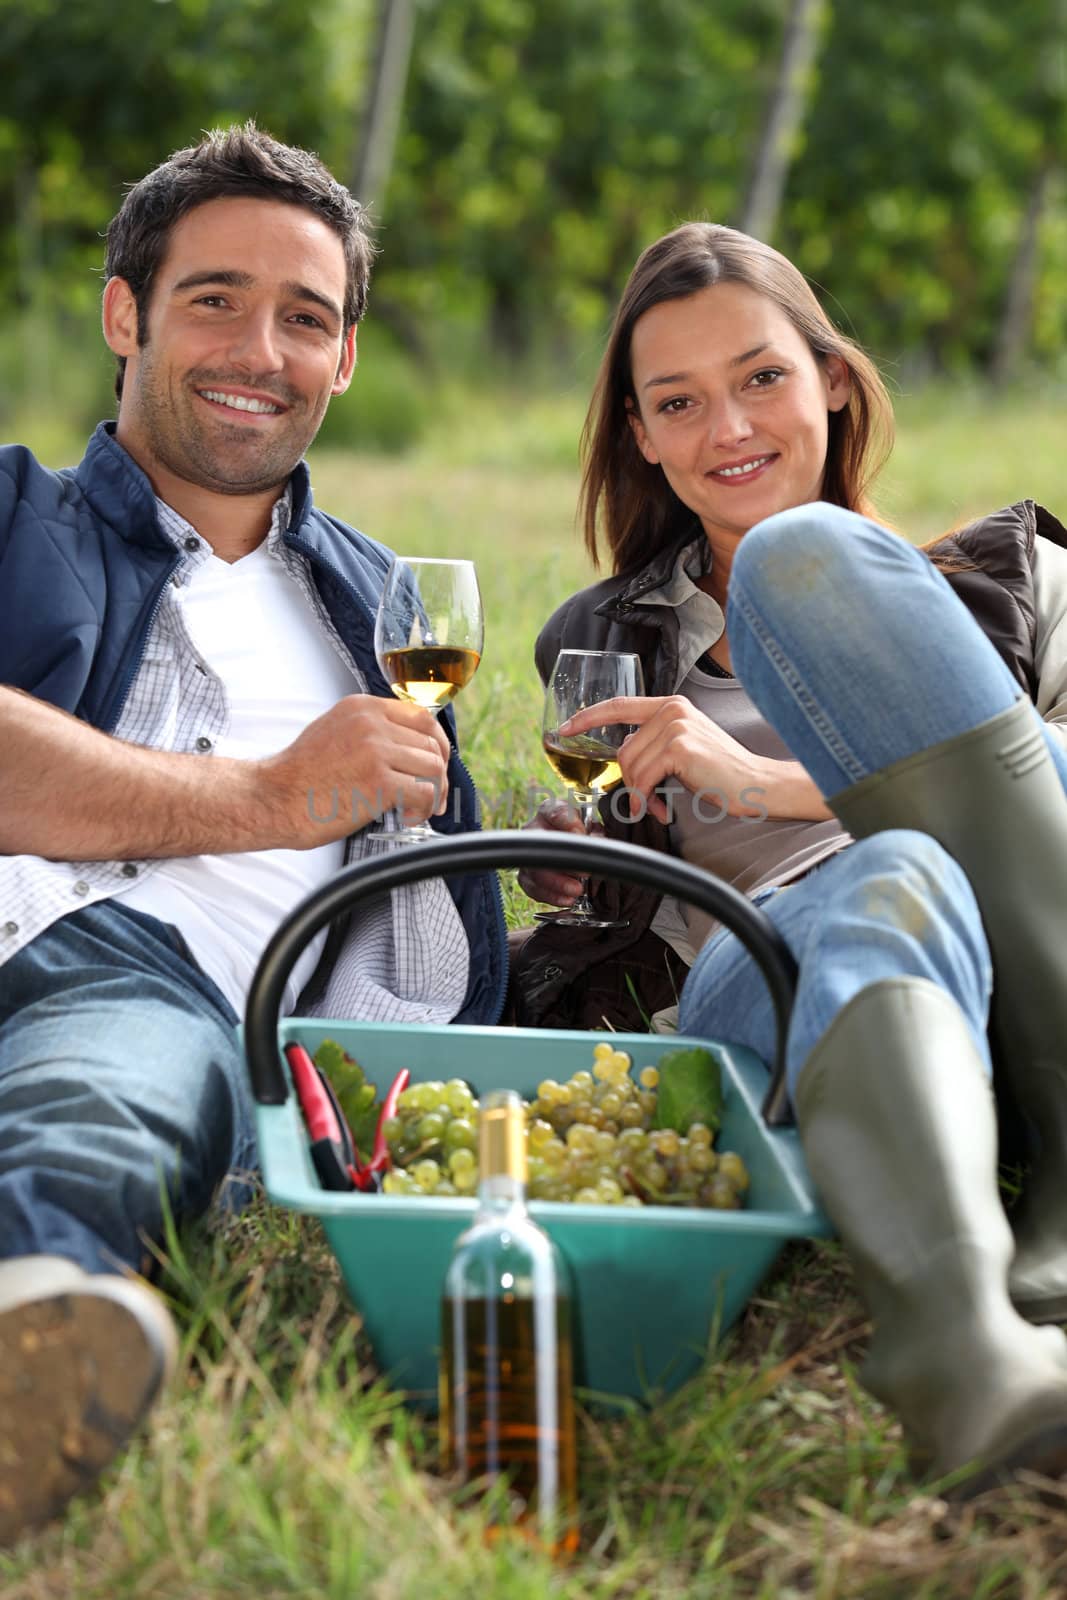 Grapepickers enjoying a glass of wine by phovoir